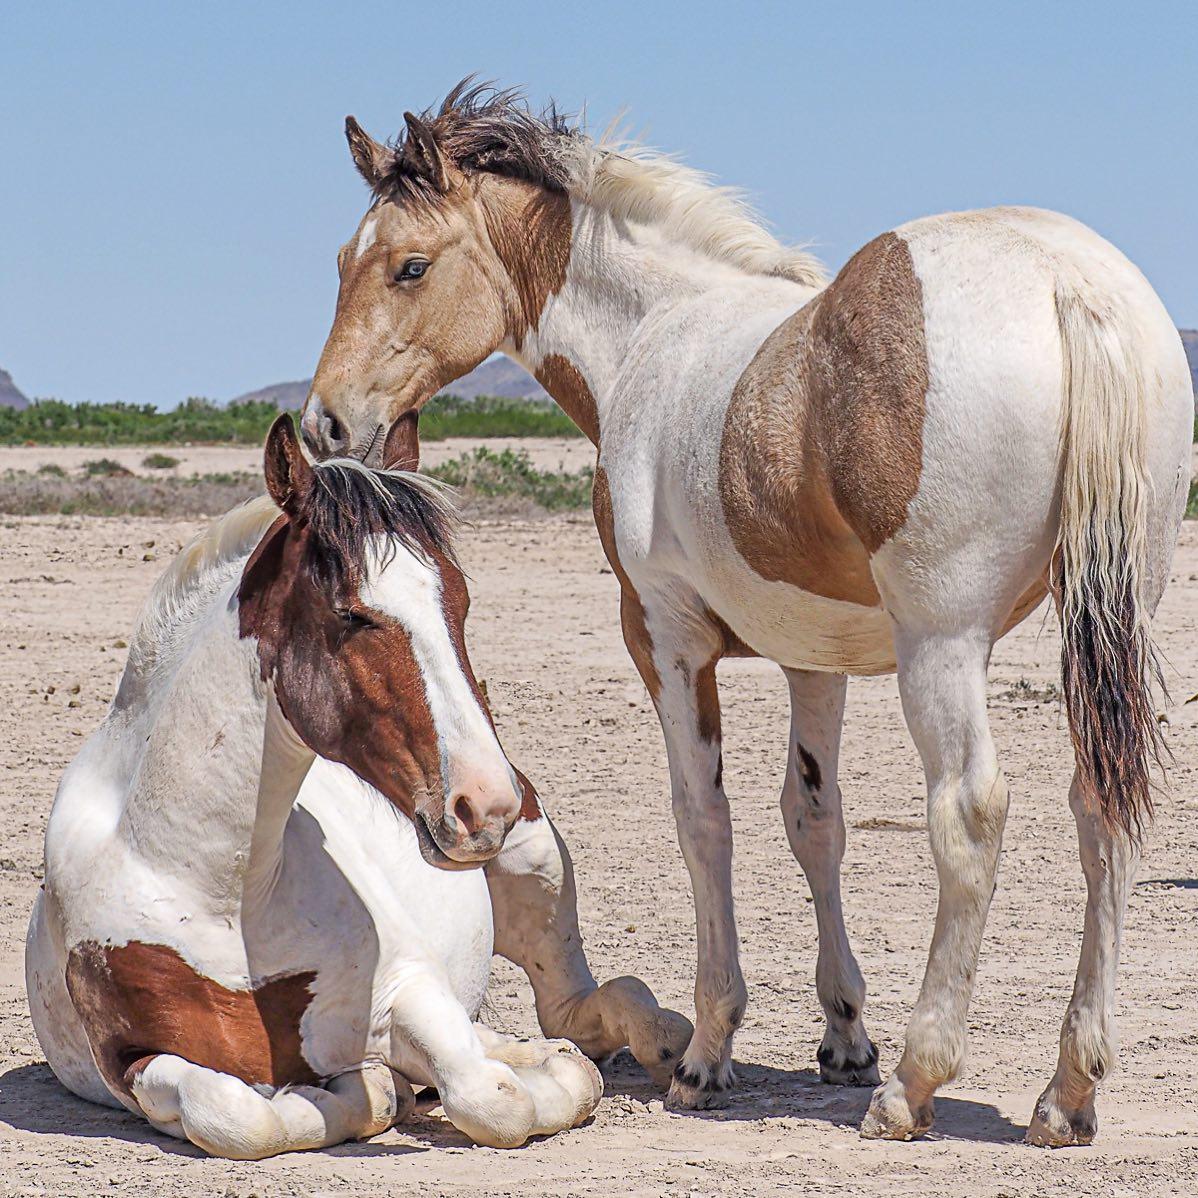 Brother-sister duo, Jasper and the Blue-eyed Filly rest together several years ago. They are Onaqui wild horses, located in Utah. (Courtesy of <a href="https://www.instagram.com/swgoudge/">Susan Goudge</a>)